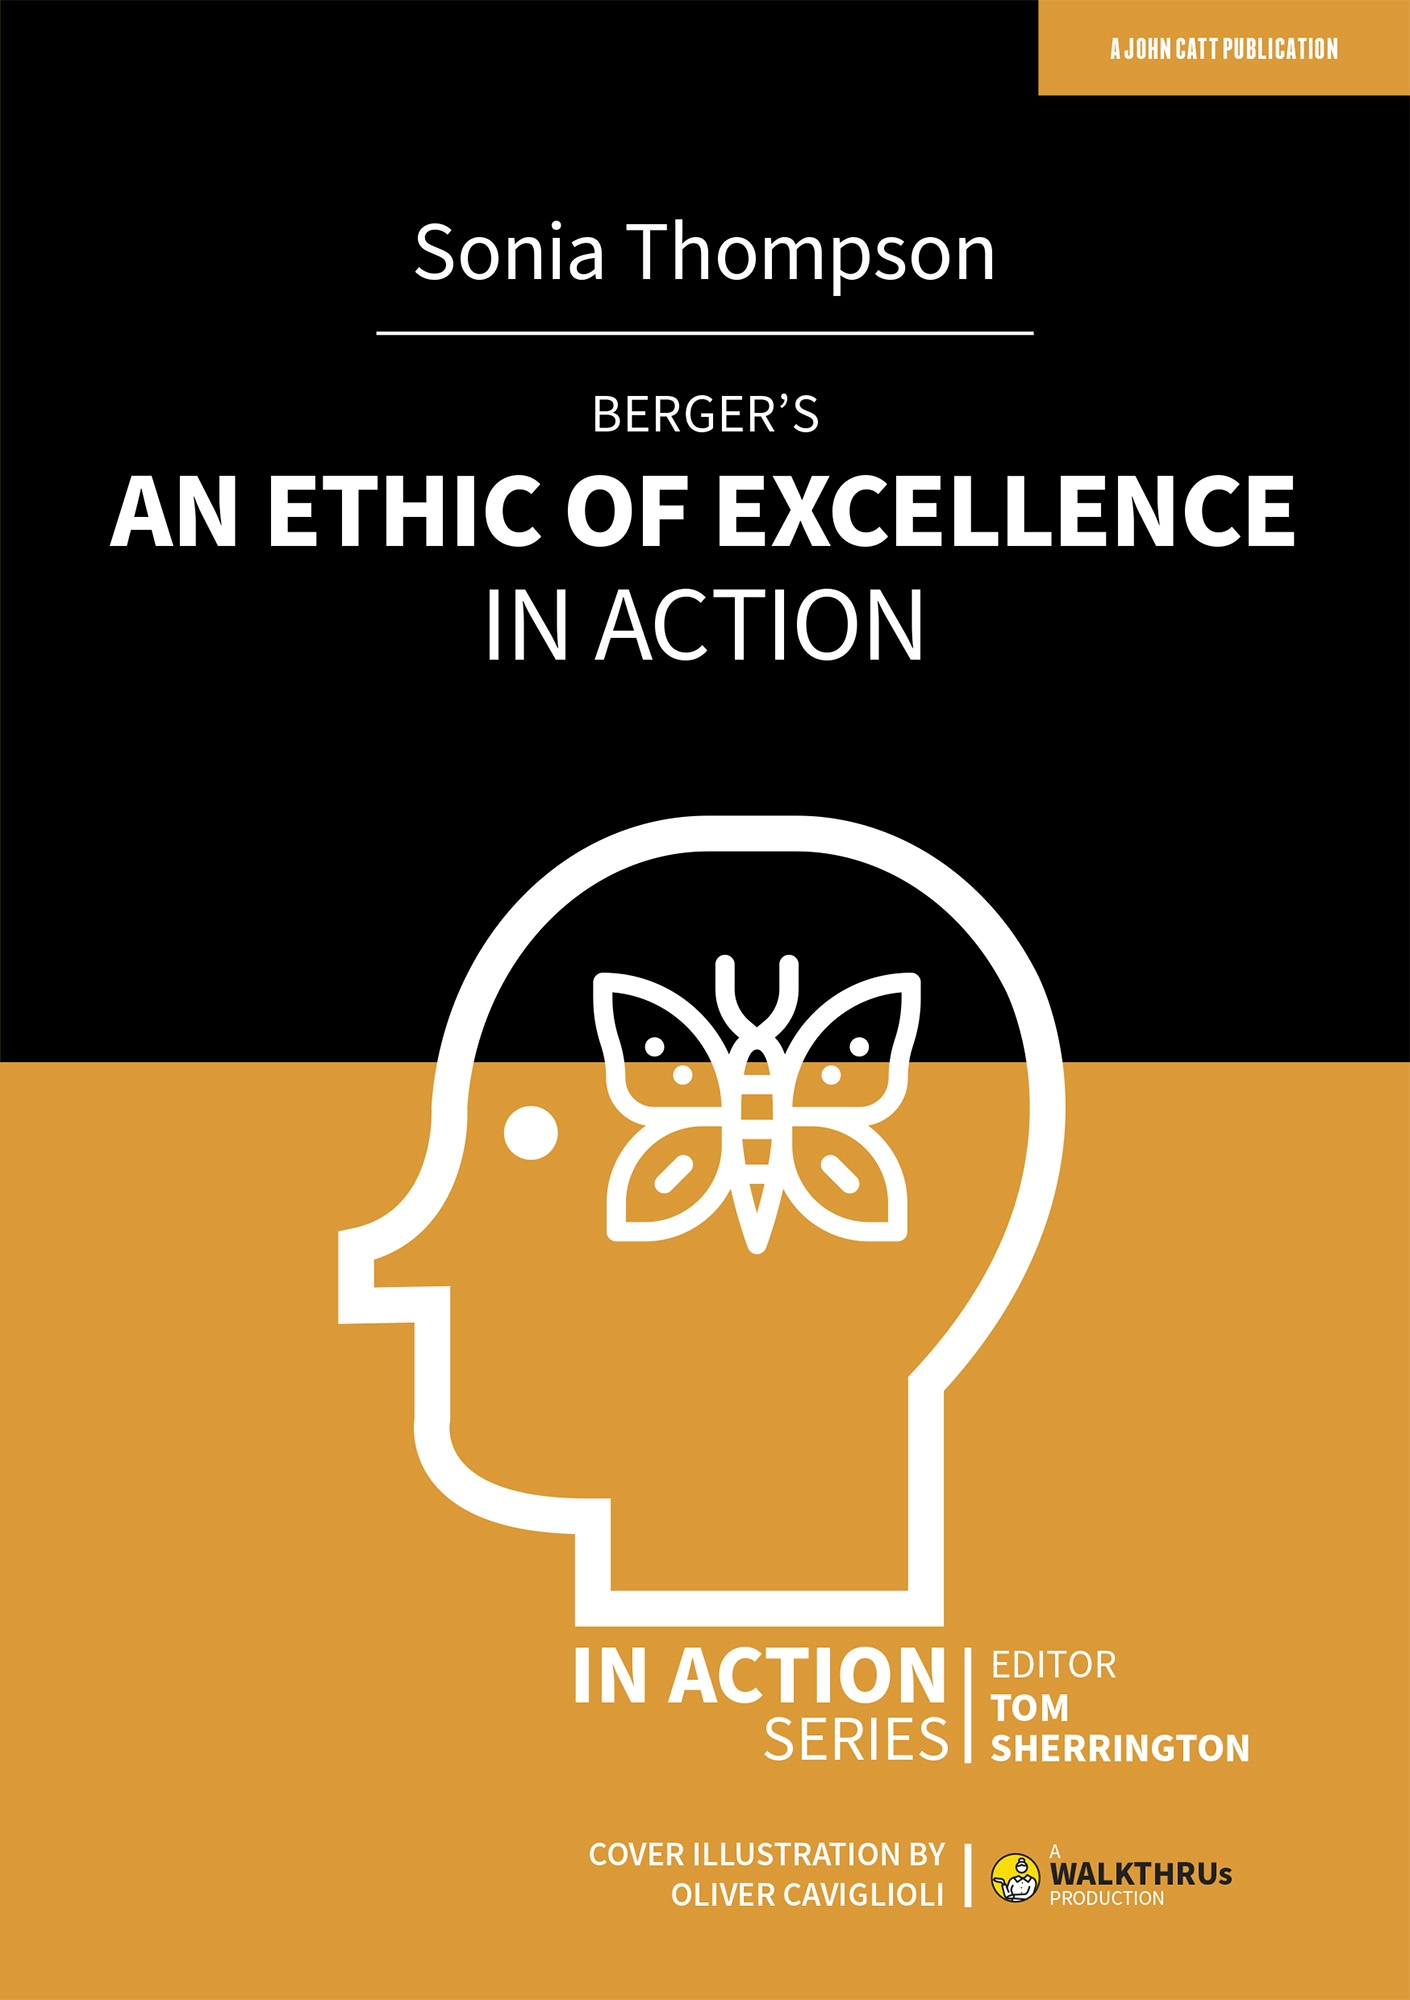 Featured image for “Berger's An Ethic of Excellence in Action”